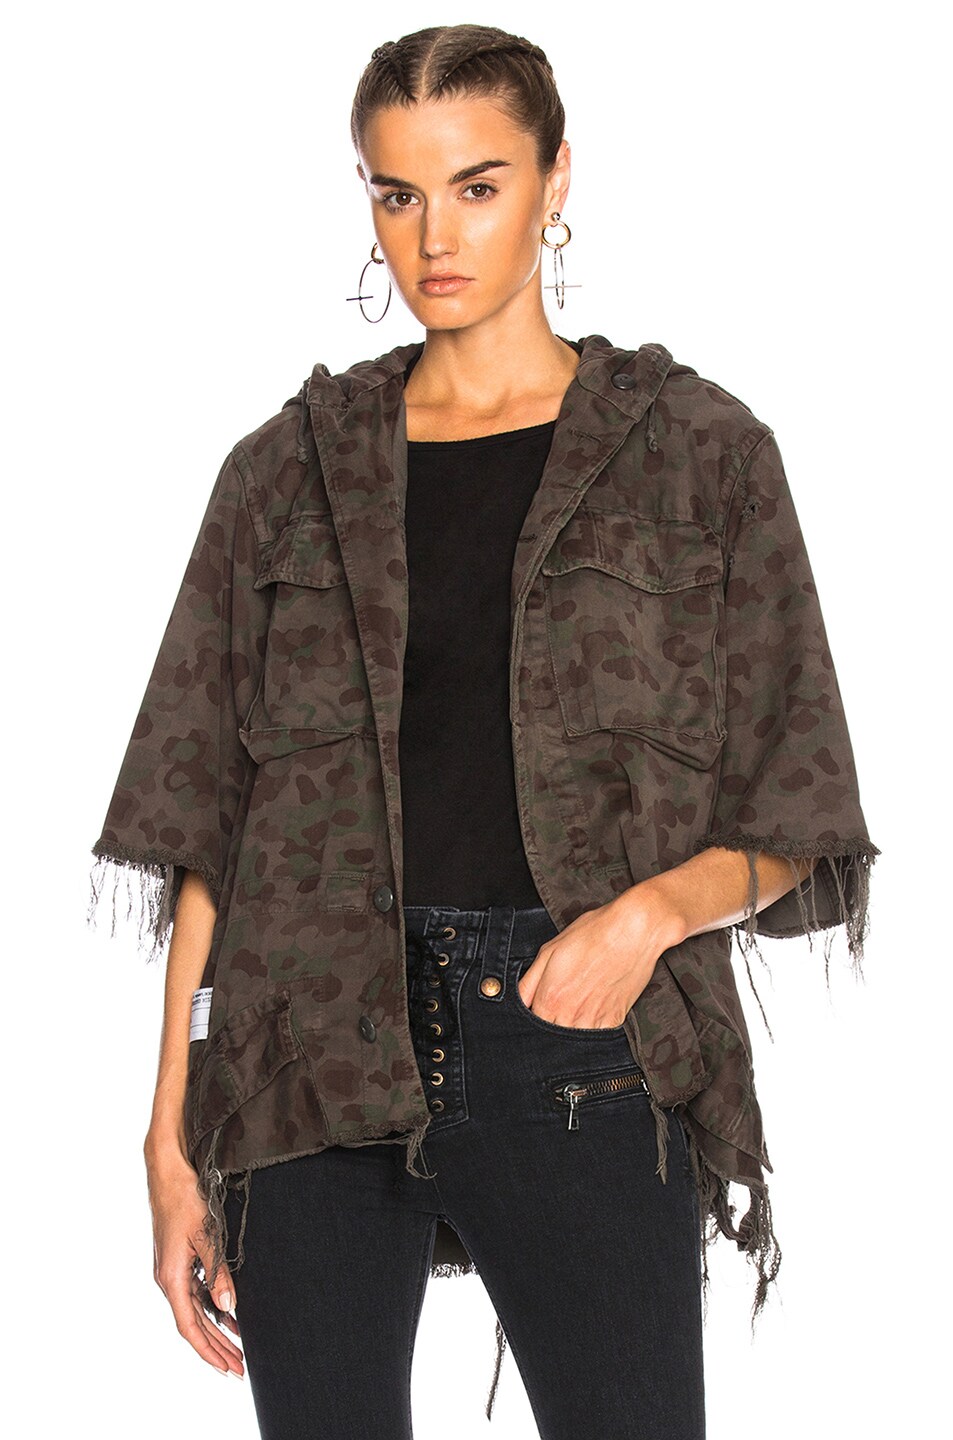 Image 1 of ICONS Objects of Devotion Cut Off Parka Jacket in Black Camo